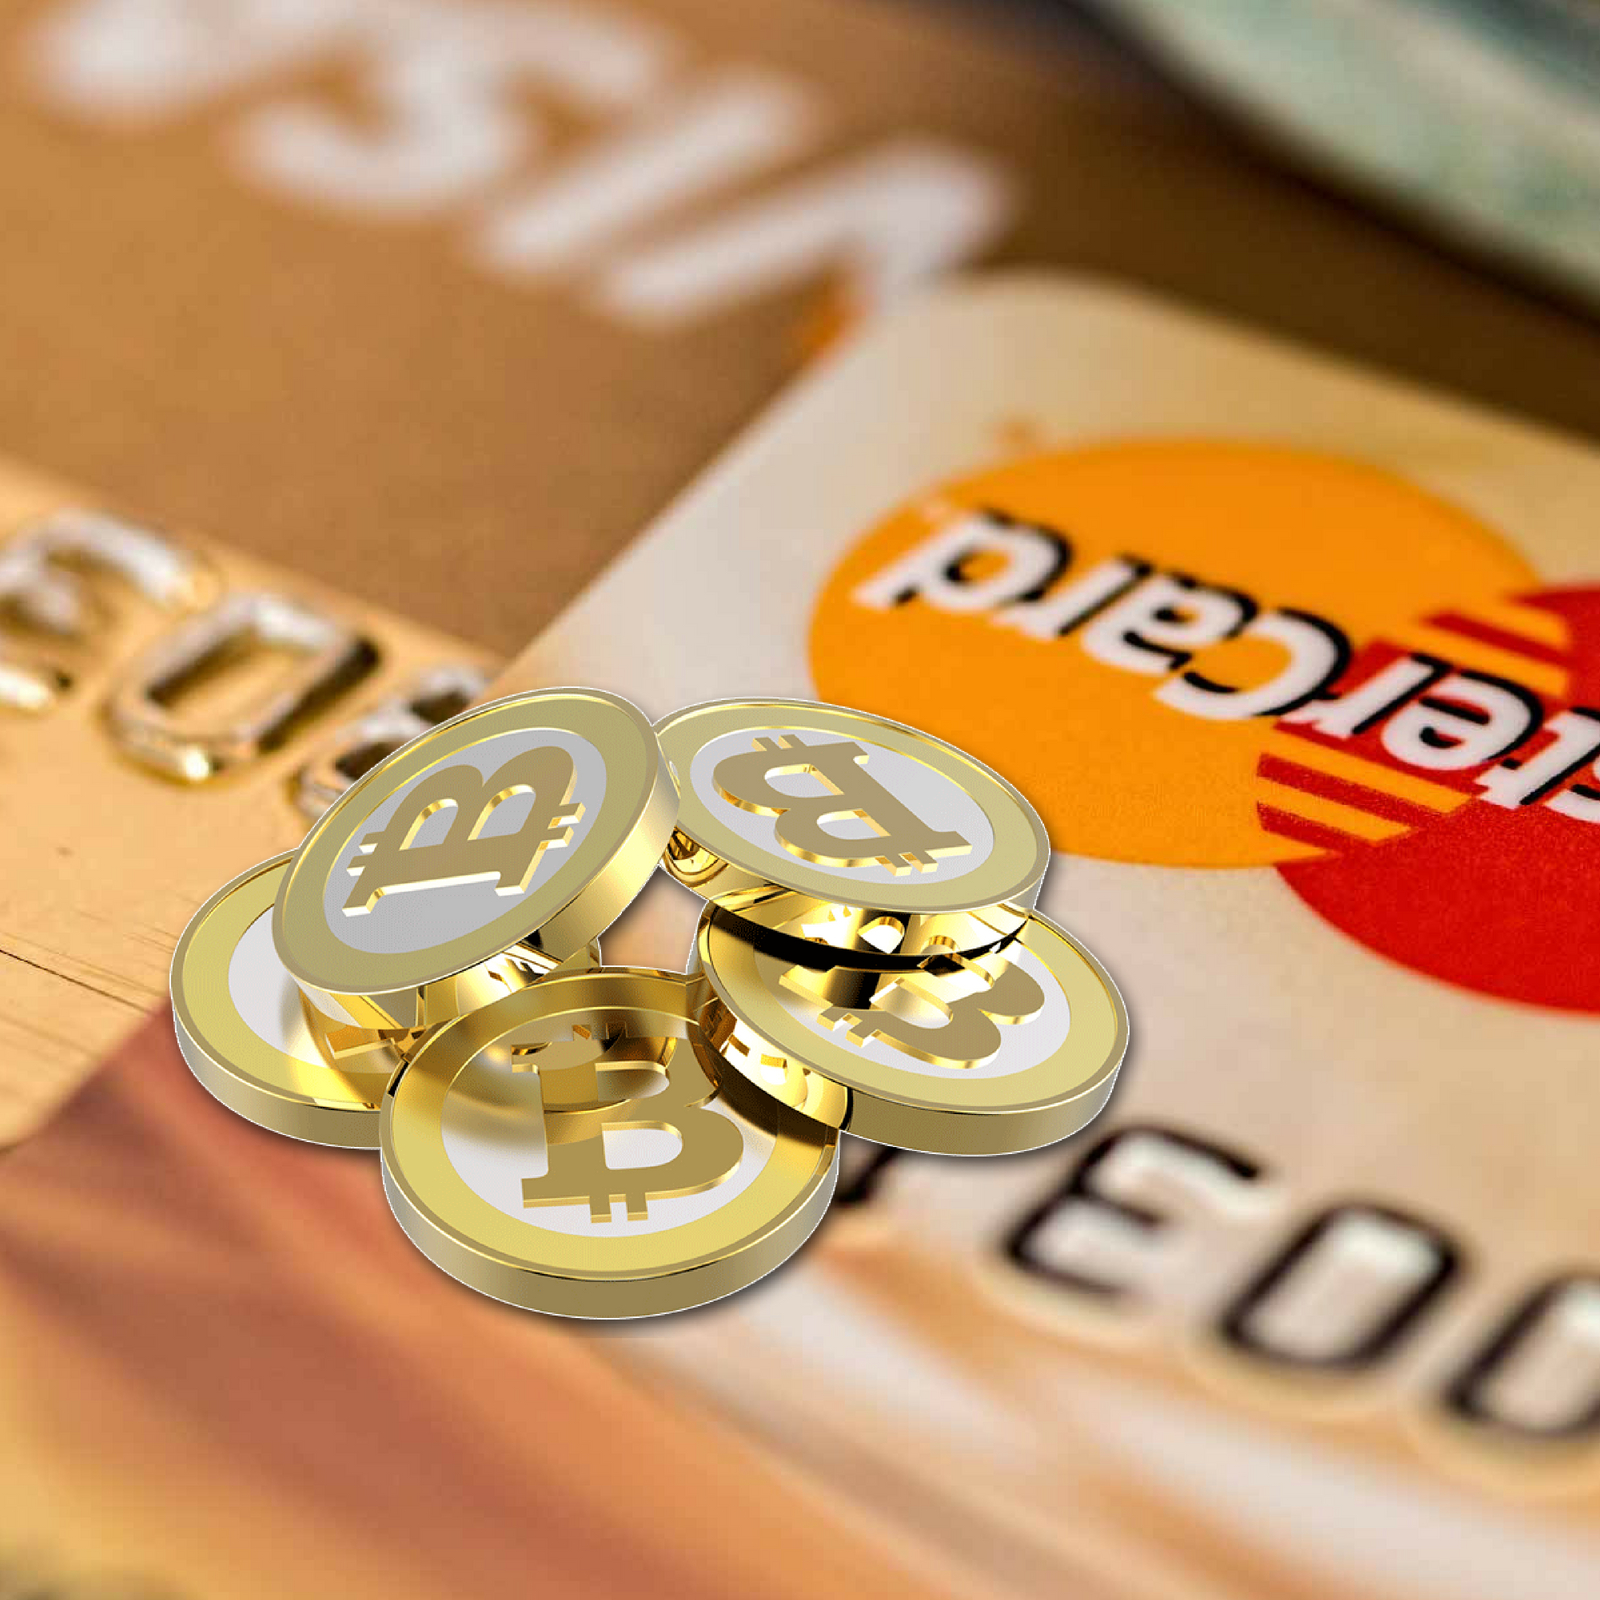 Bitcoin (Almost) Everywhere: 5 Crypto Debit Cards Worth Checking Out